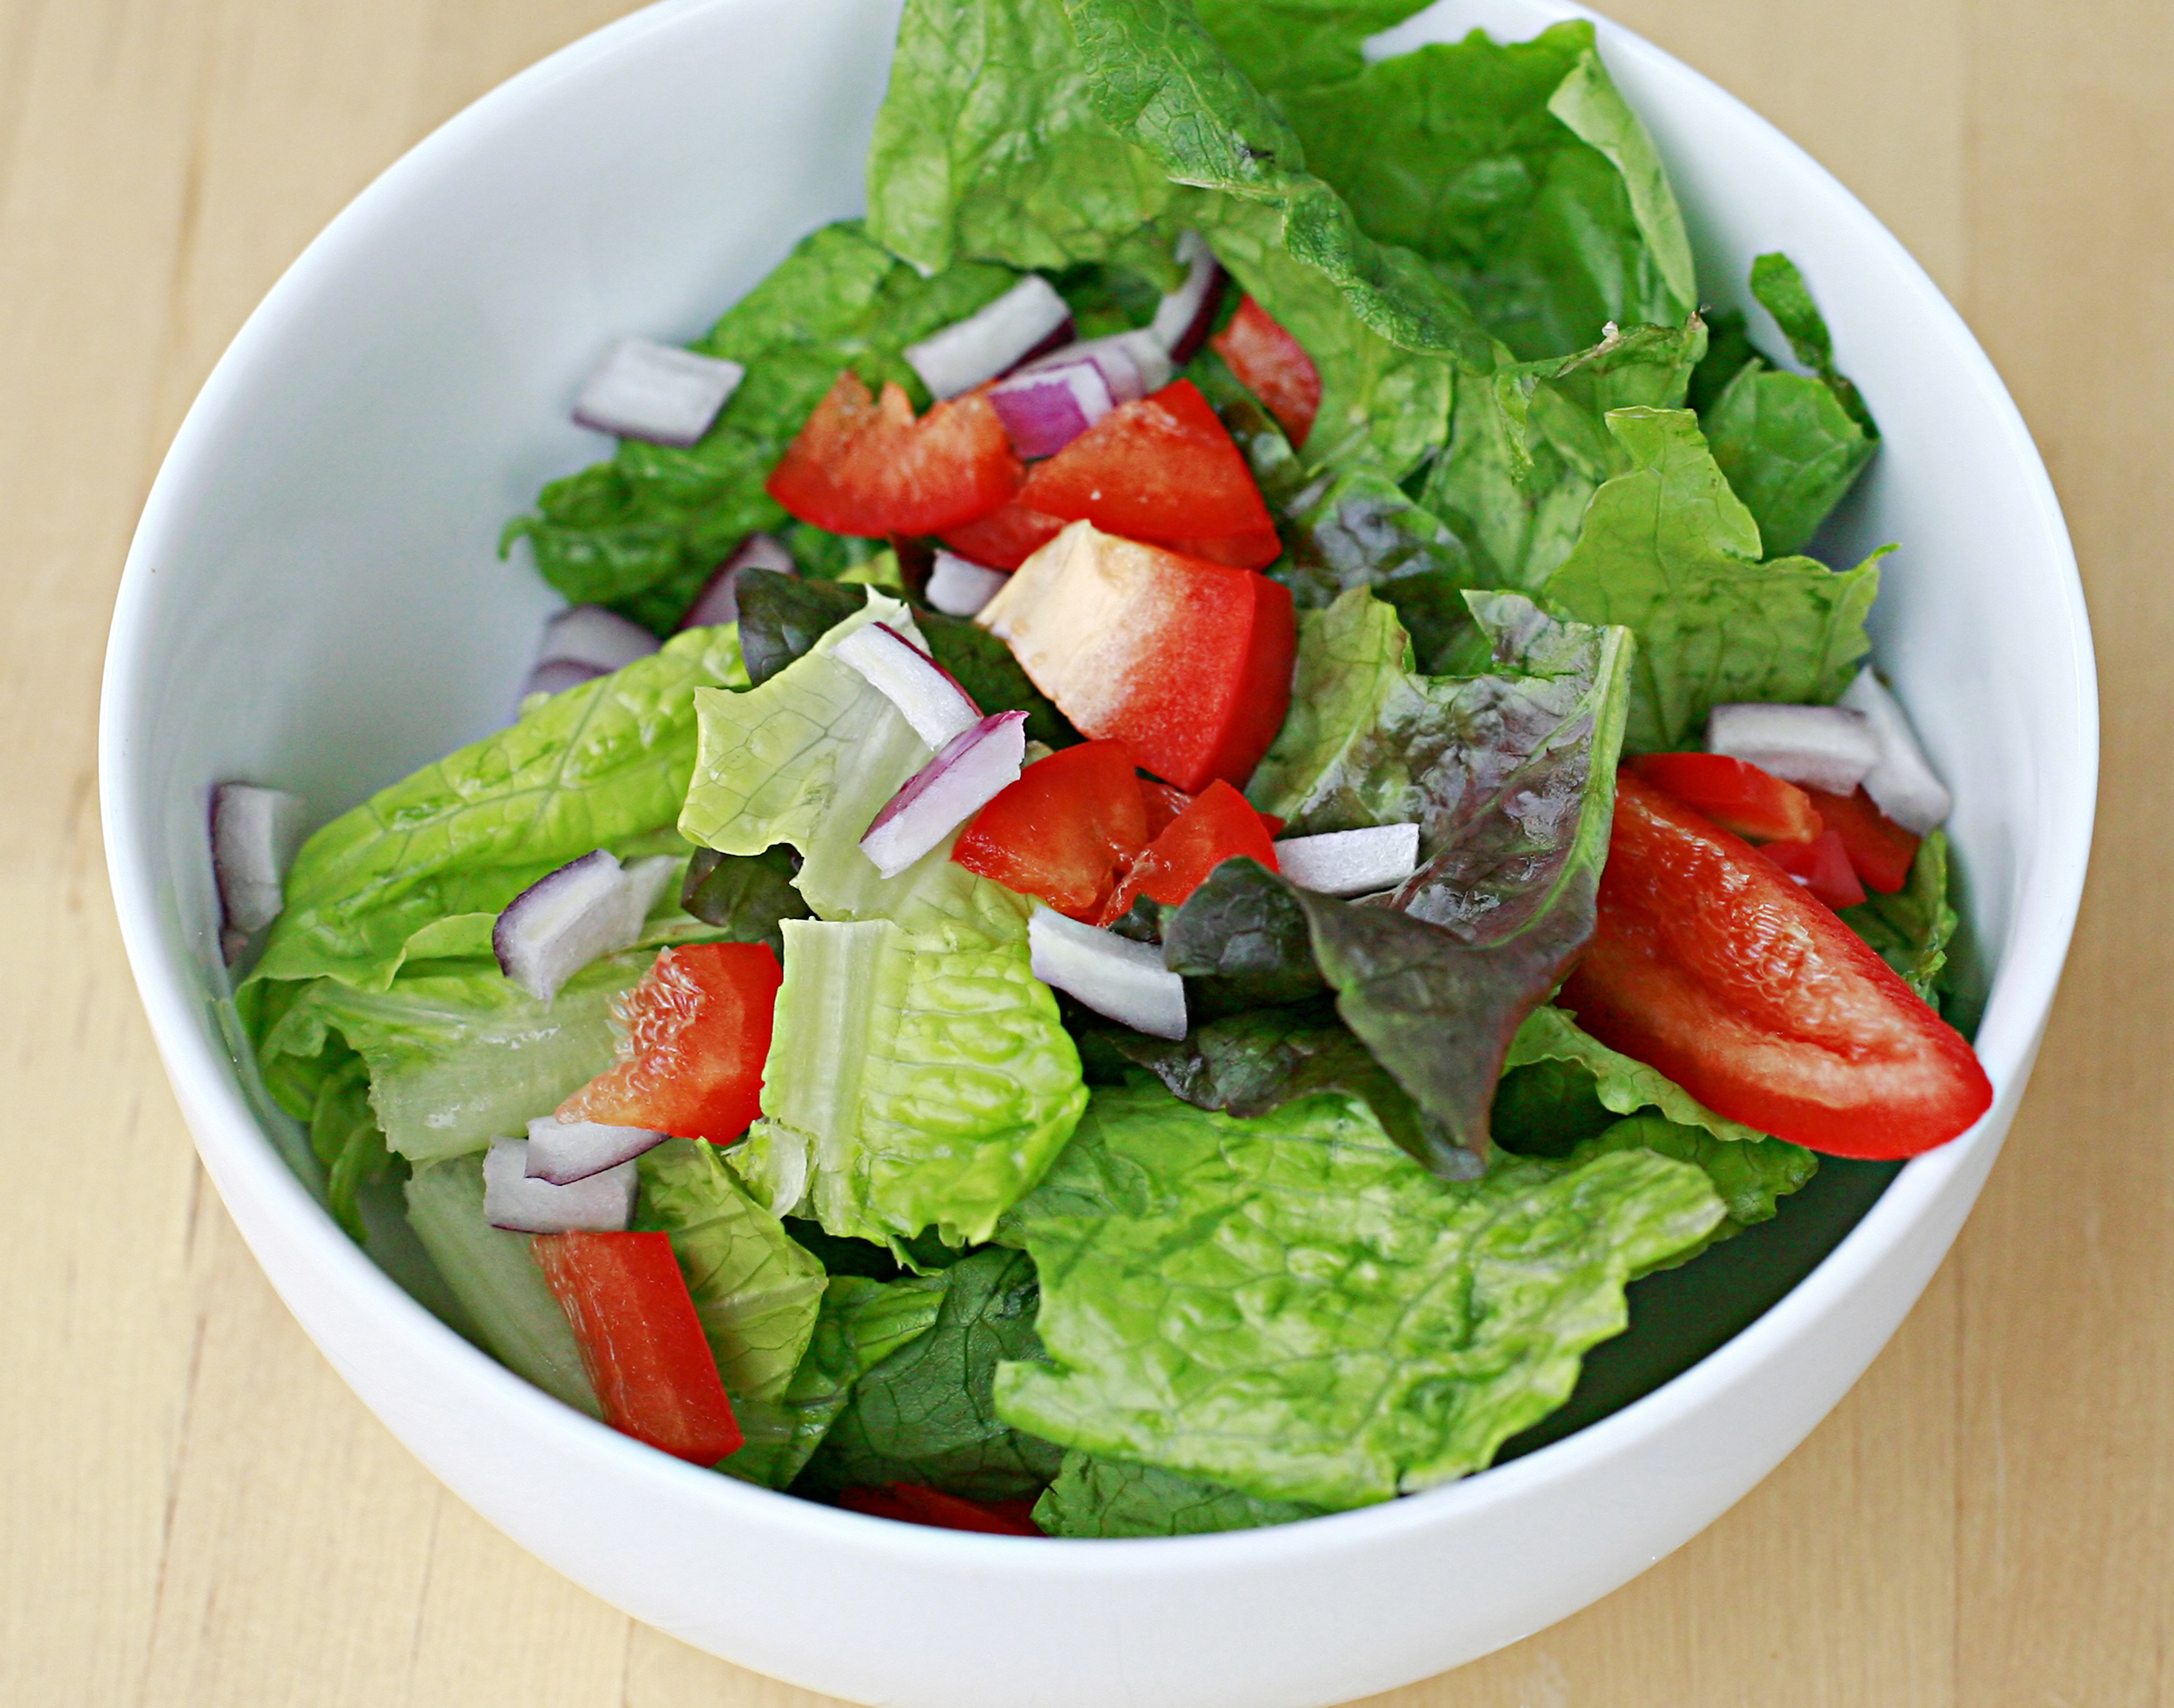 add side salads to meals to incorporate more vegetables into your diet